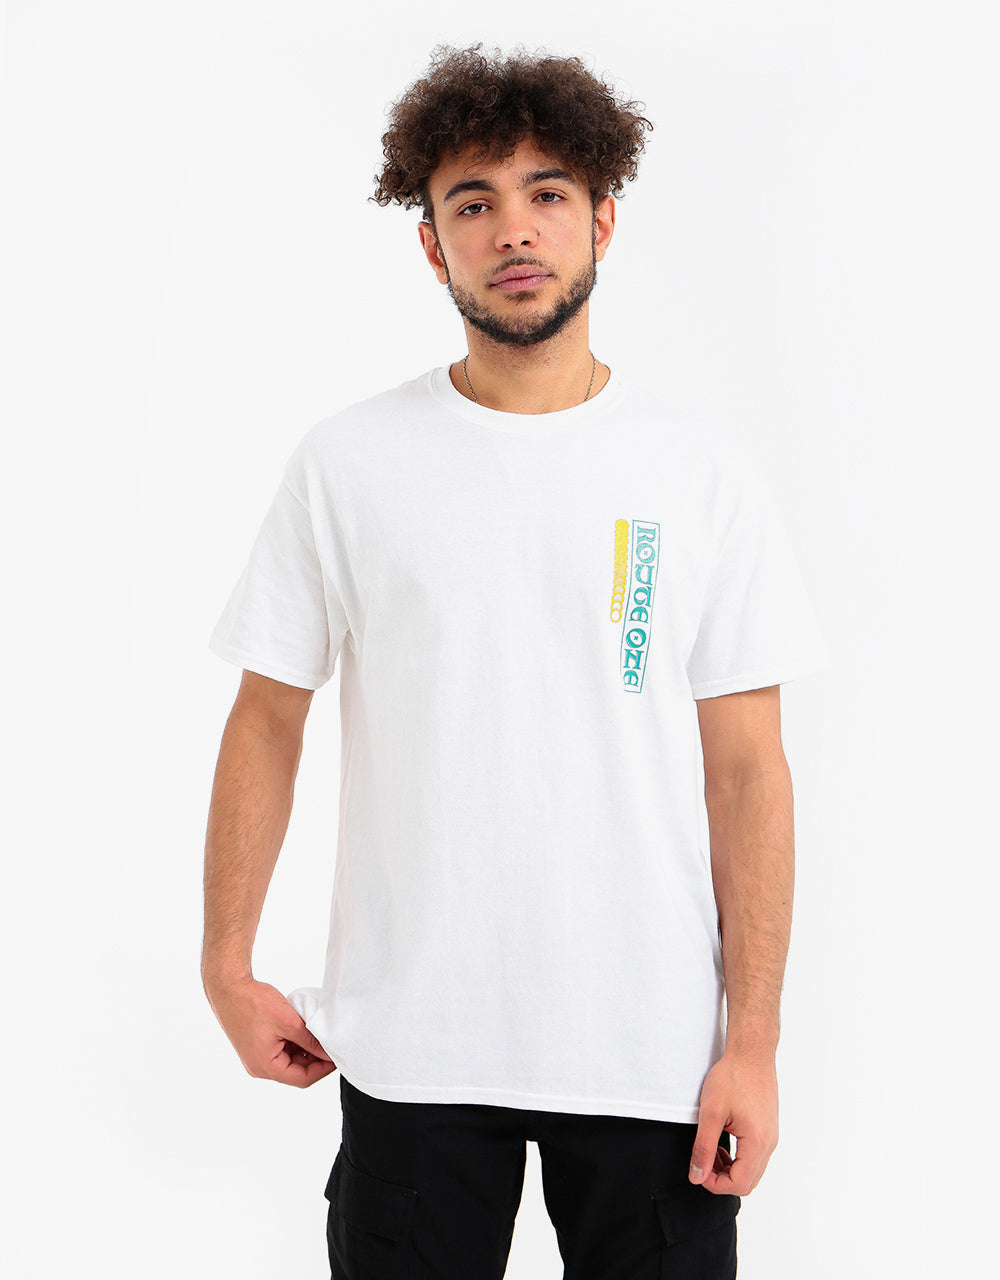 Route One Pure Radiance T-Shirt - White